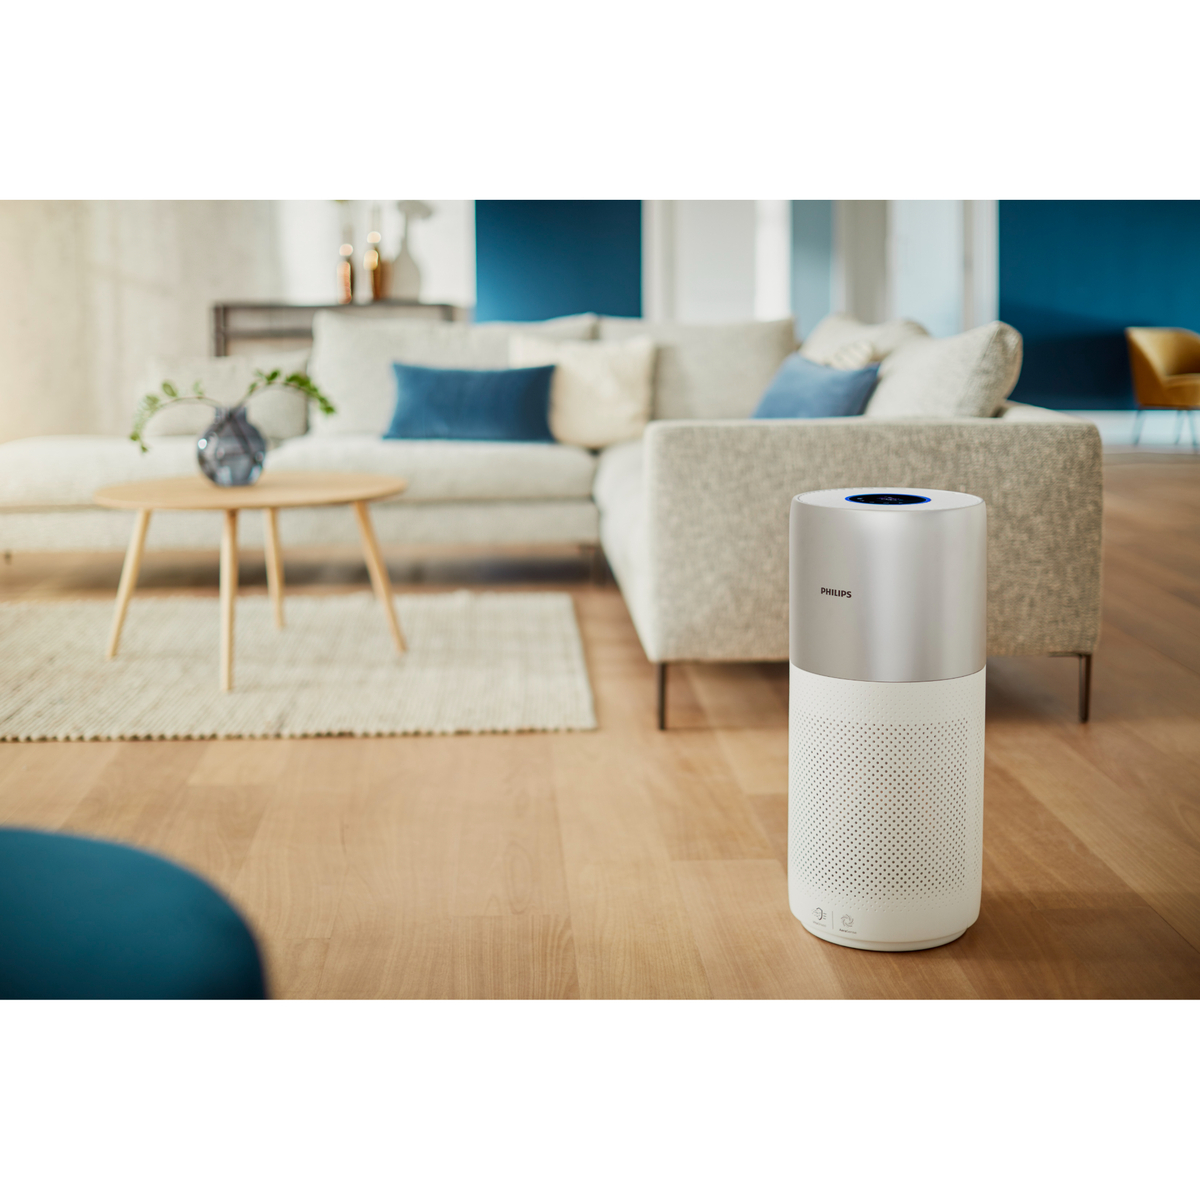 Philips Air Purifier with Smart Filter Indicator, 135 m², White/Silver, AC3036/90